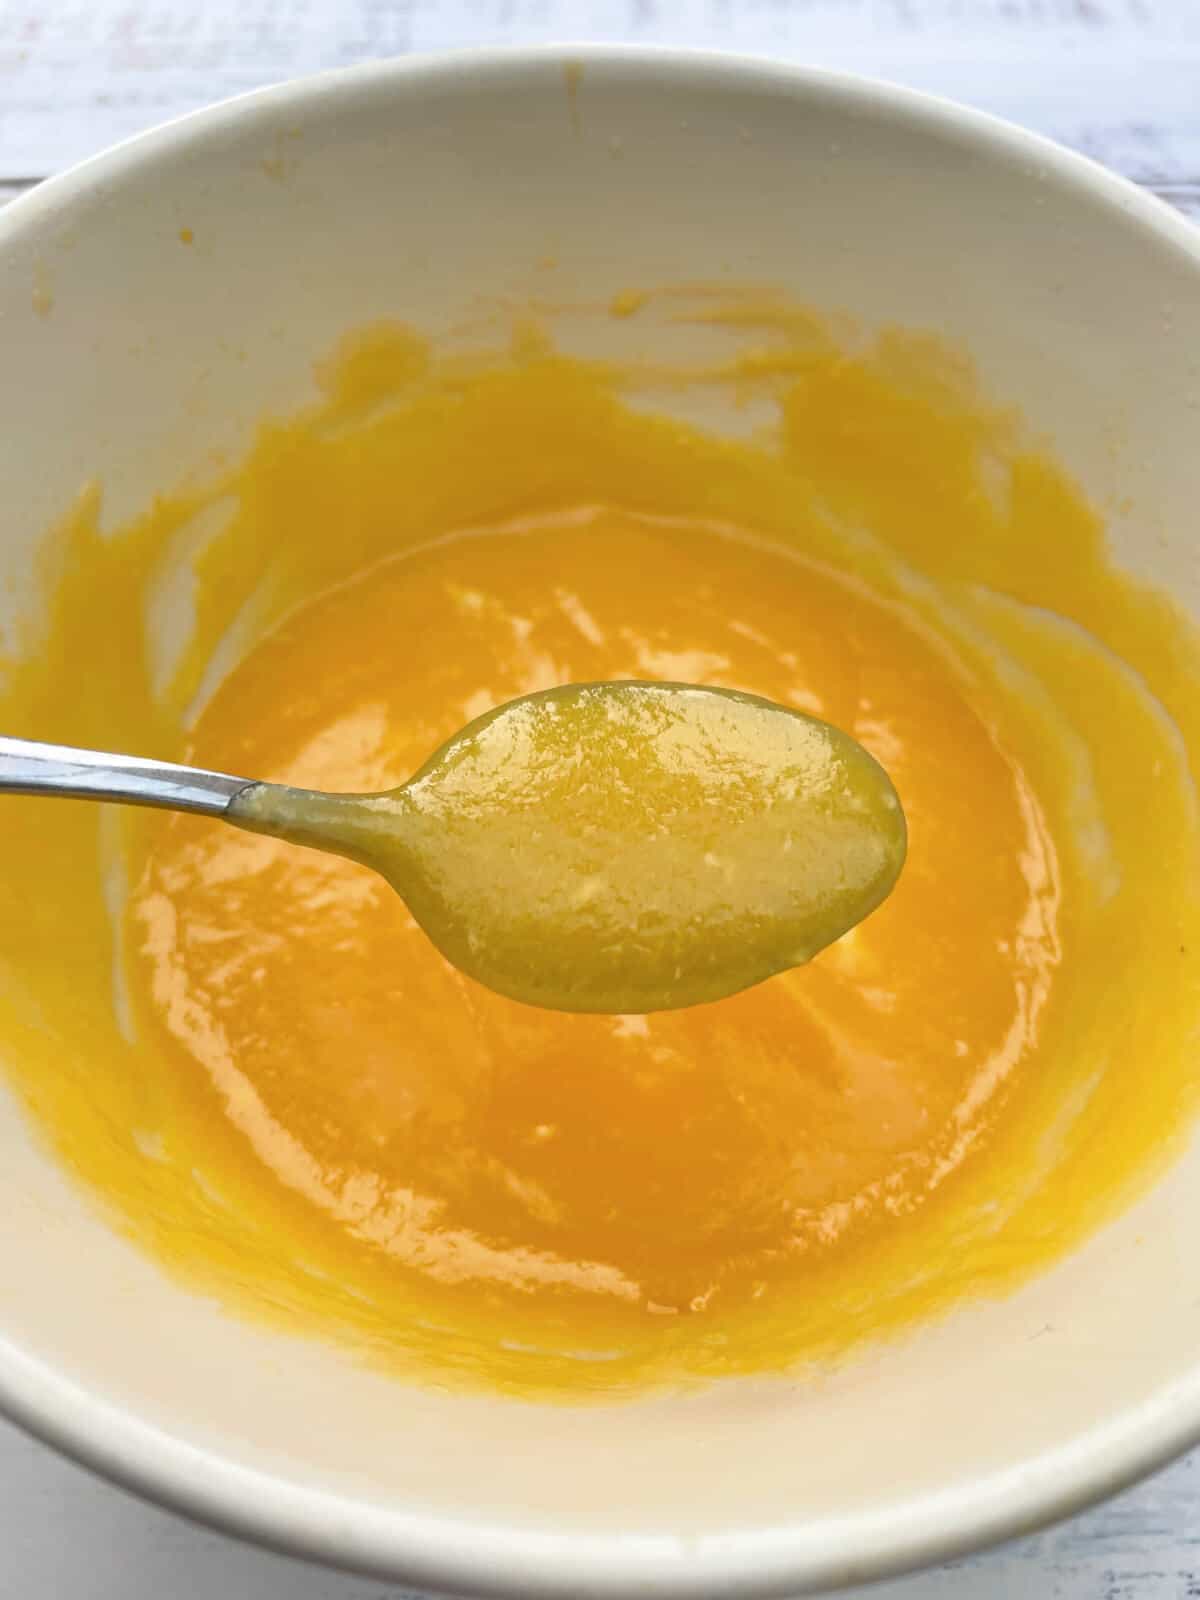 Passionfruit curd in  a bowl with a spoon showing the curd coating the spoon.